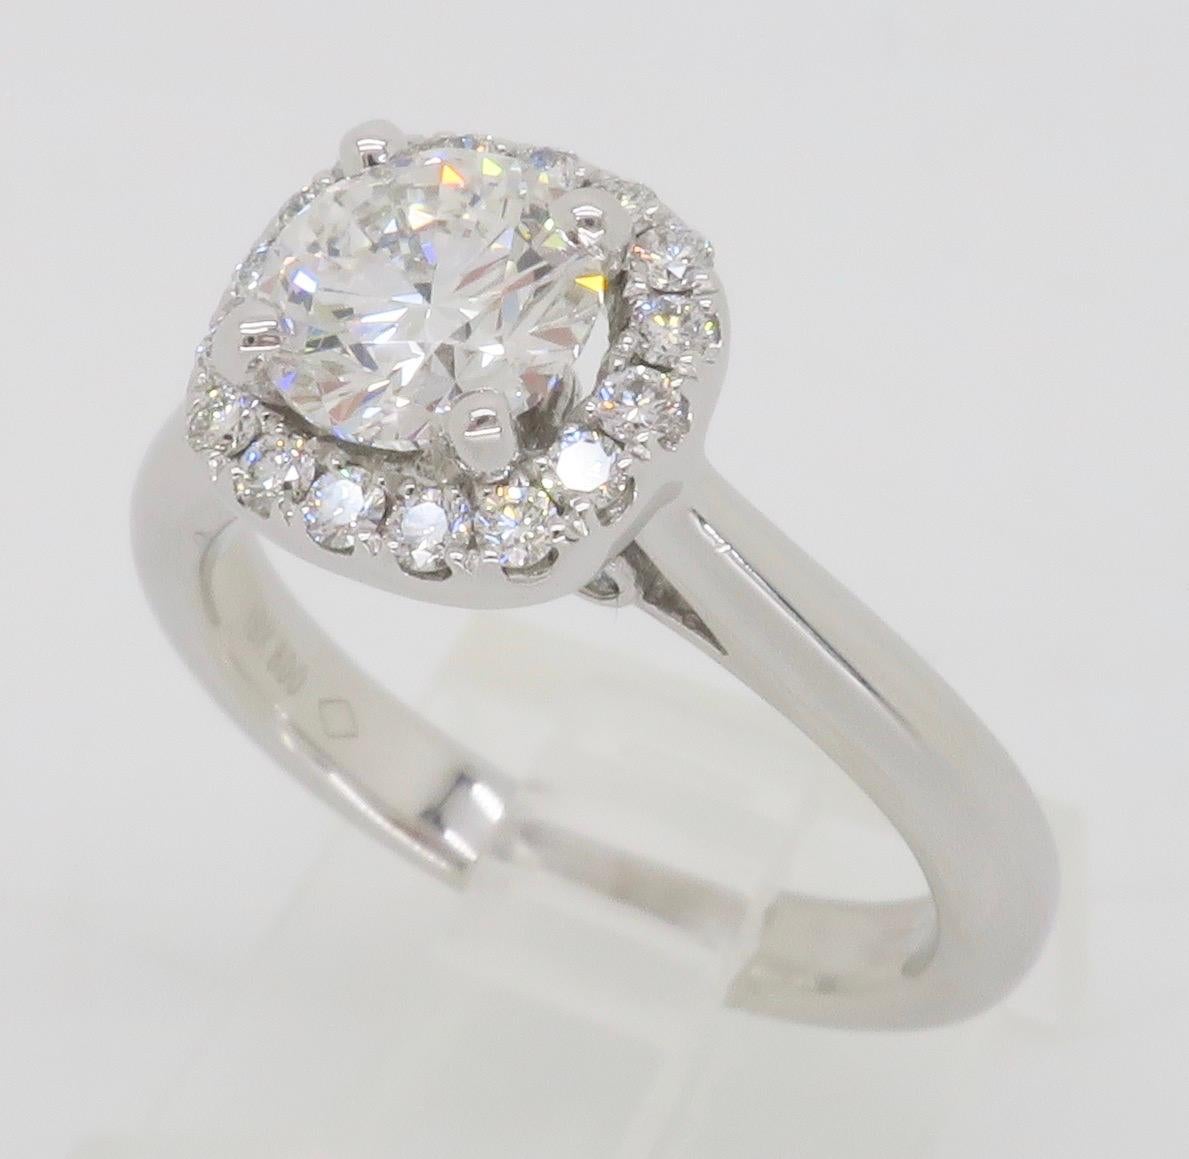 GIA Certified Round Brilliant Cut Diamond in a Stunning Scott Kay Halo Setting  For Sale 5